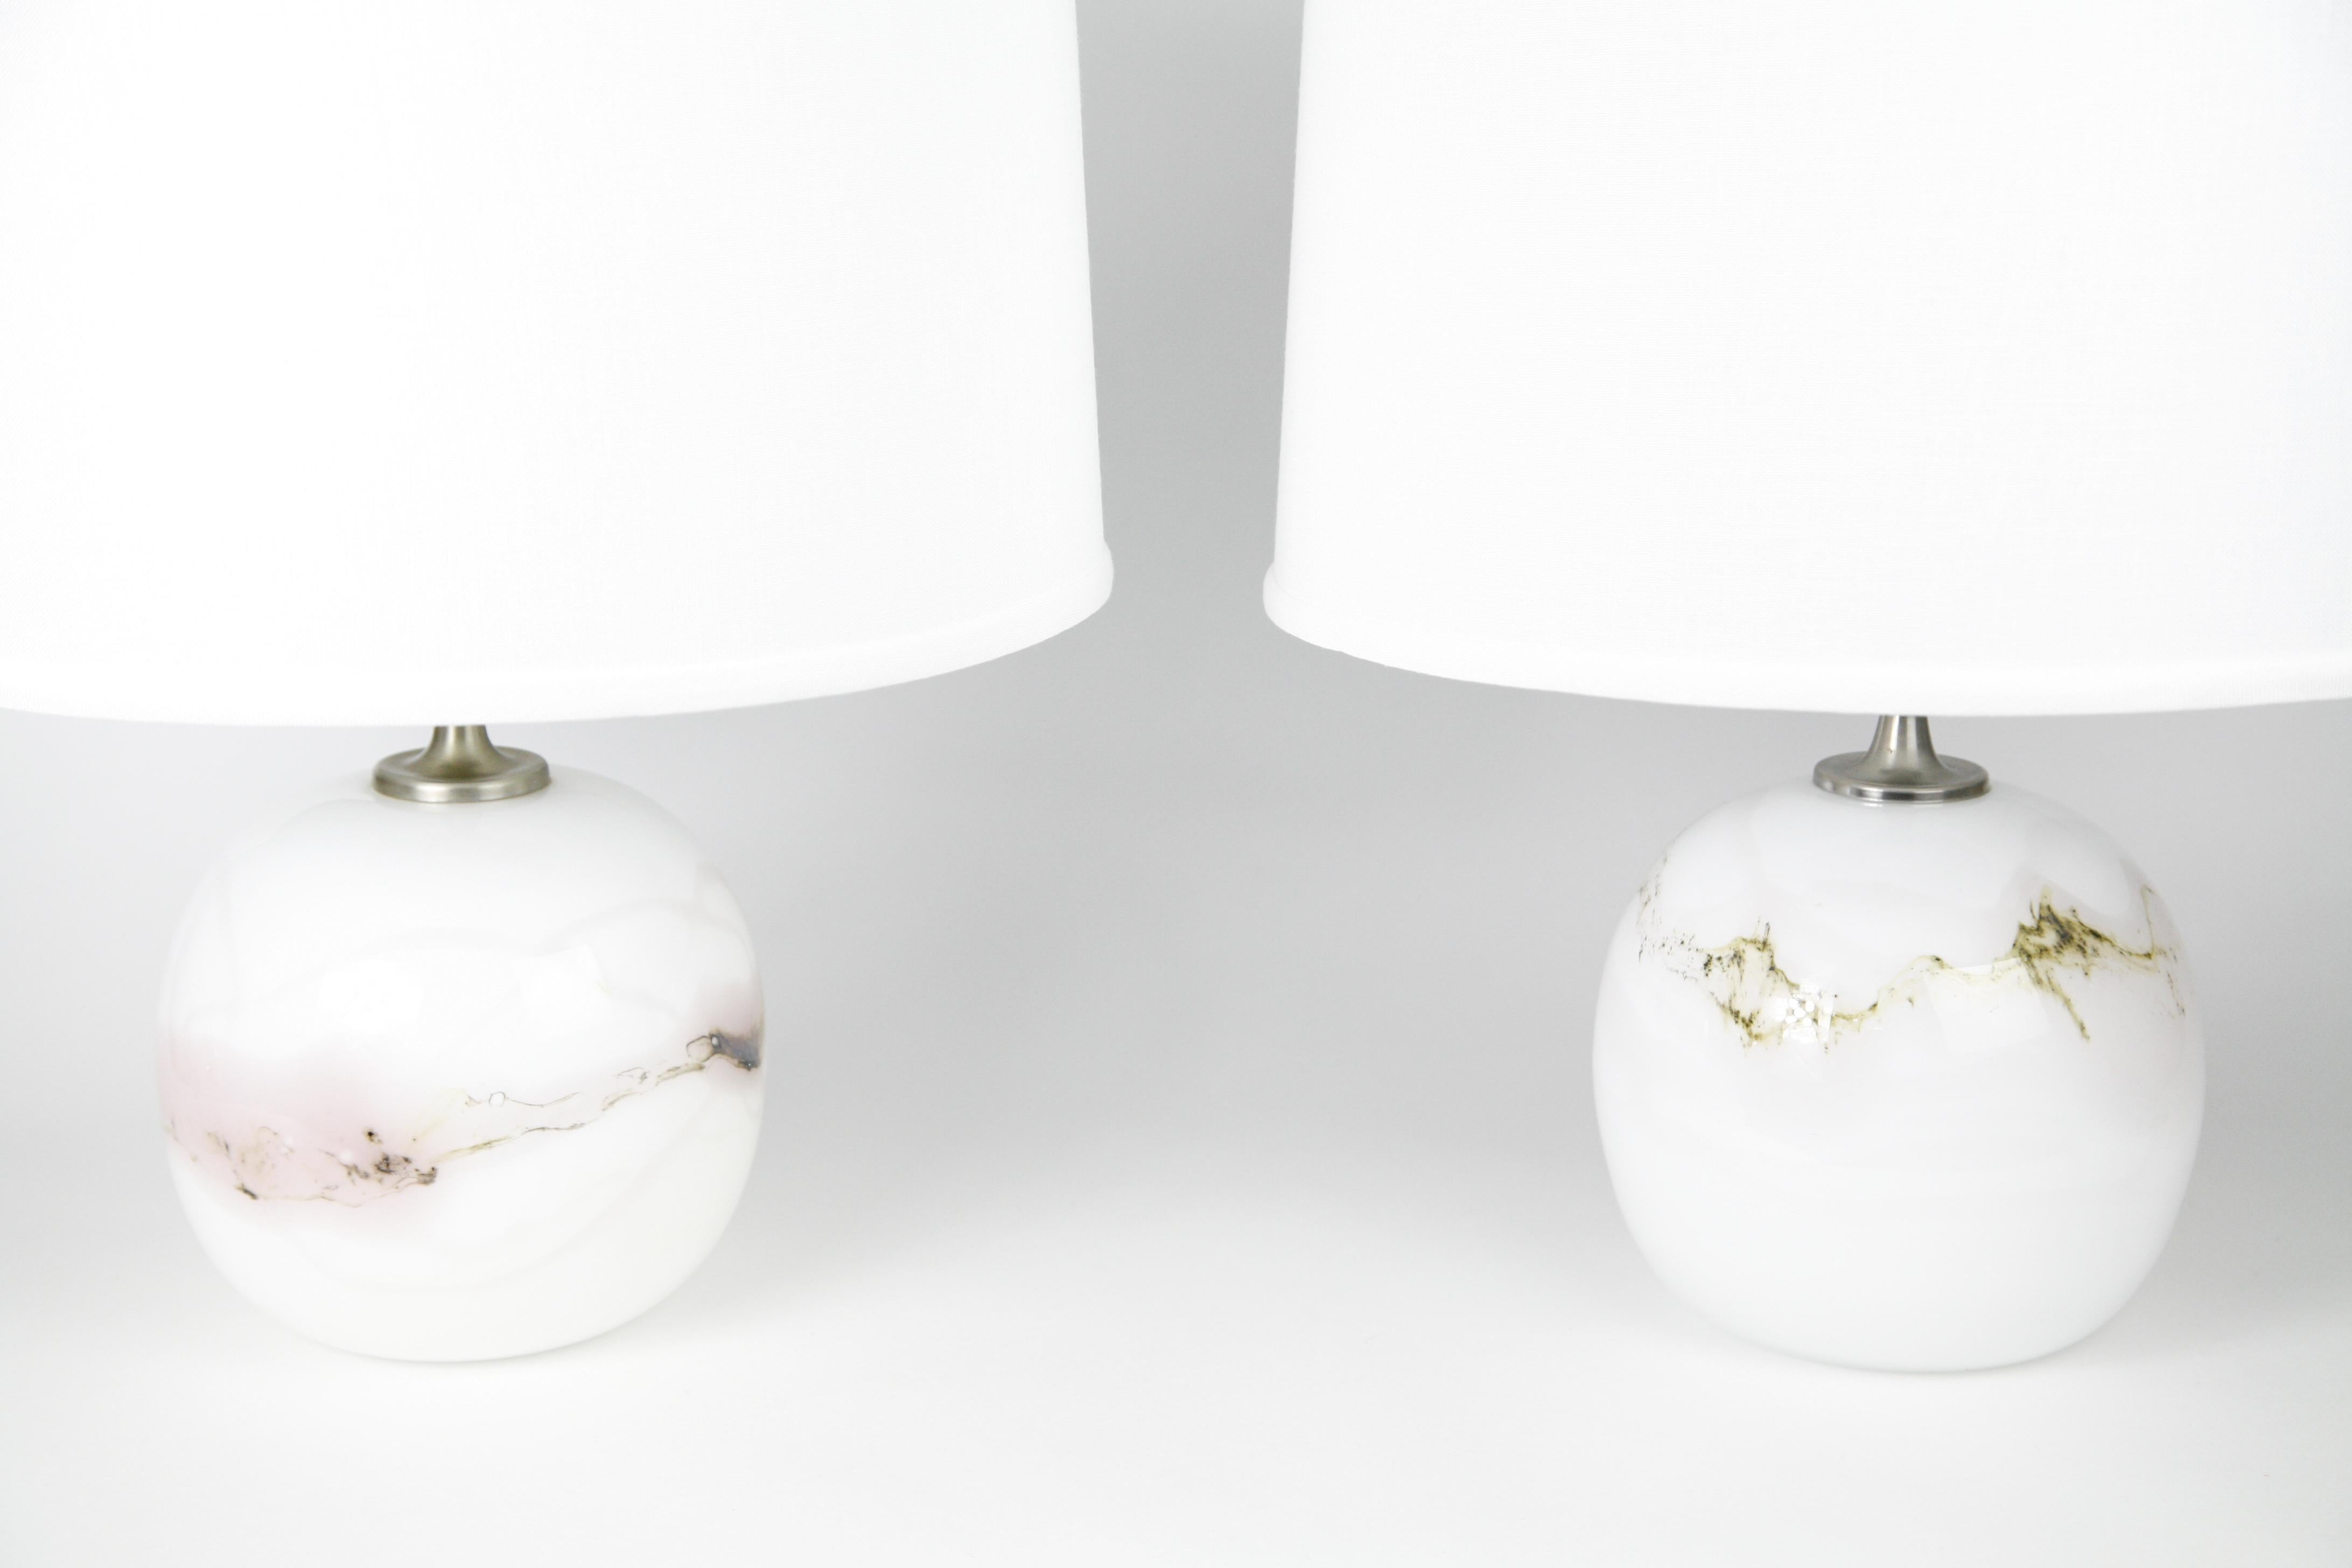 Two Holmegaard lamps with brushed steel fittings by Holmegaard, Denmark, 1984 in white with a variety of mixed colors into including pink glass melt underlying the smooth clear glass designed by Michael Bang, 1984.
9